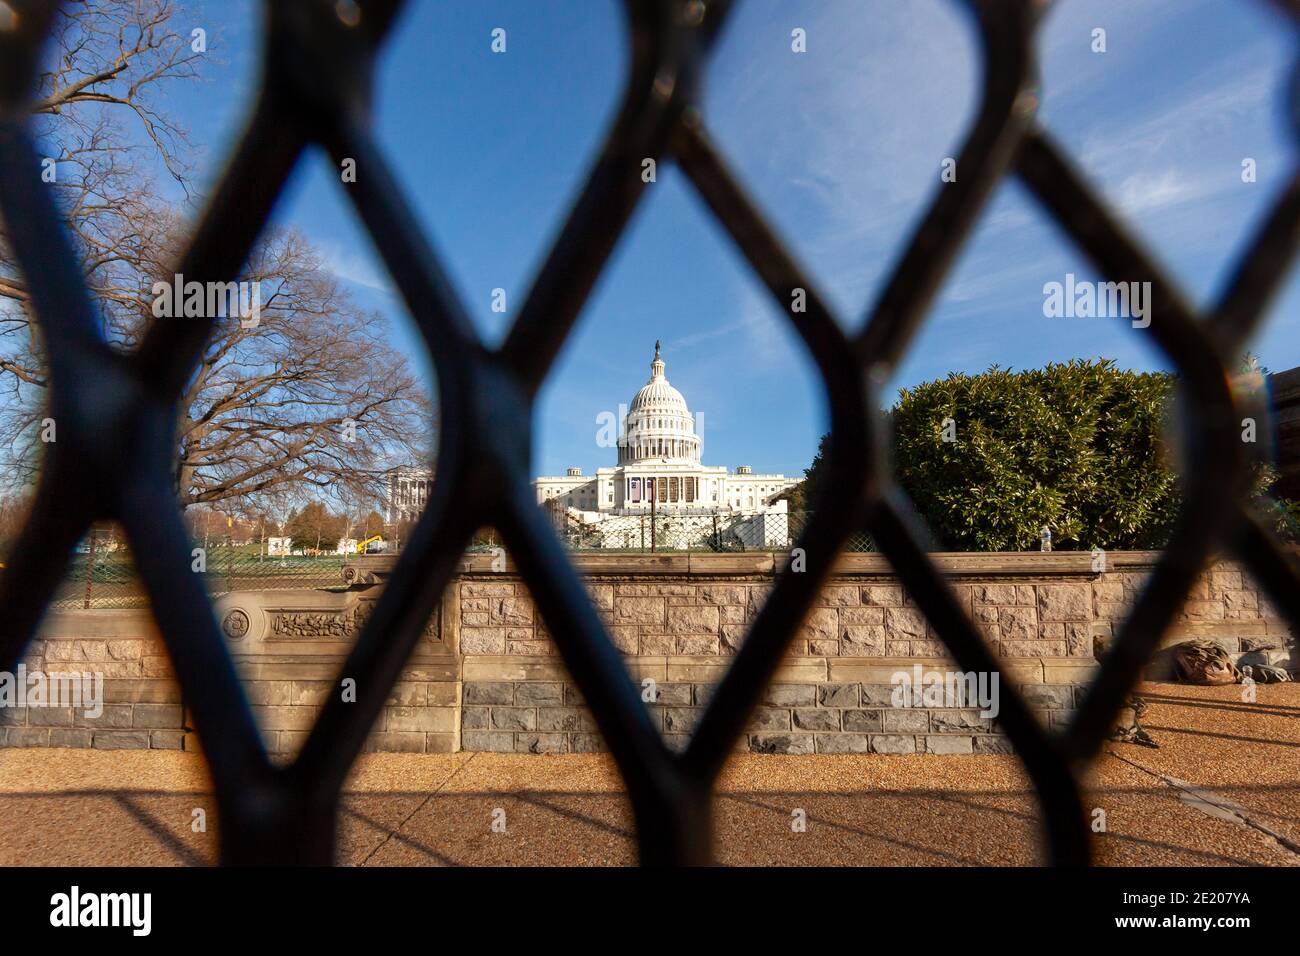 Washington, DC, USA, 10 January 2021.  Pictured:  The United States Capitol viewed through the new fence erected after the January 6 insurrection.  This photo was taken during Operation: Clean Sweep, an effort to clean up trash and propaganda left behind by fascists and Trump supporters.  It was hosted by Continue to Serve, an anti-racist organization of military veterans.  Credit: Allison C Bailey/Alamy Live News Stock Photo